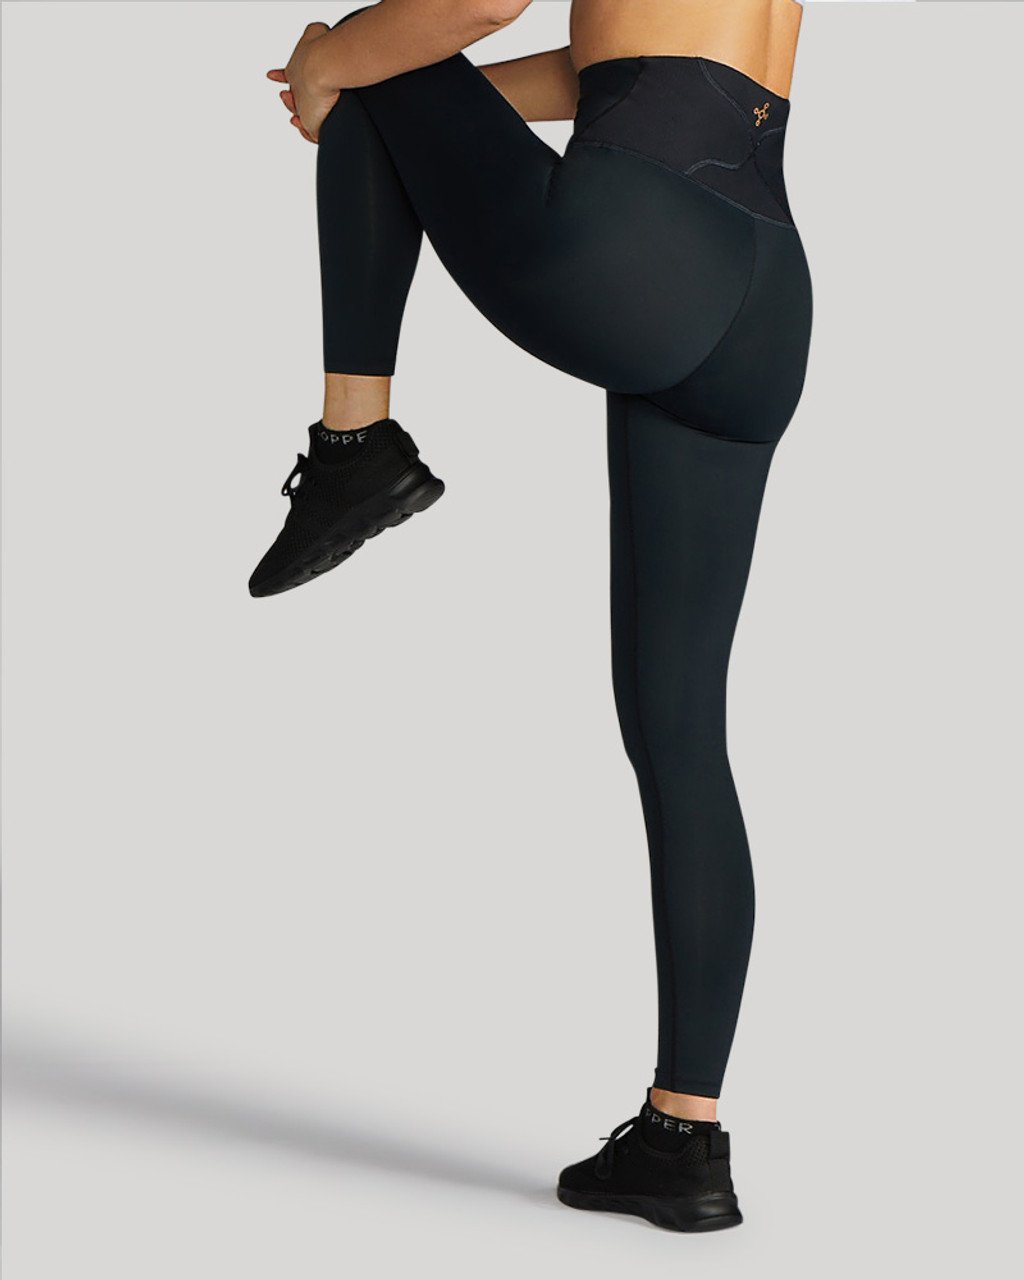 Tommie Copper® Leggings, All-Day Comfort